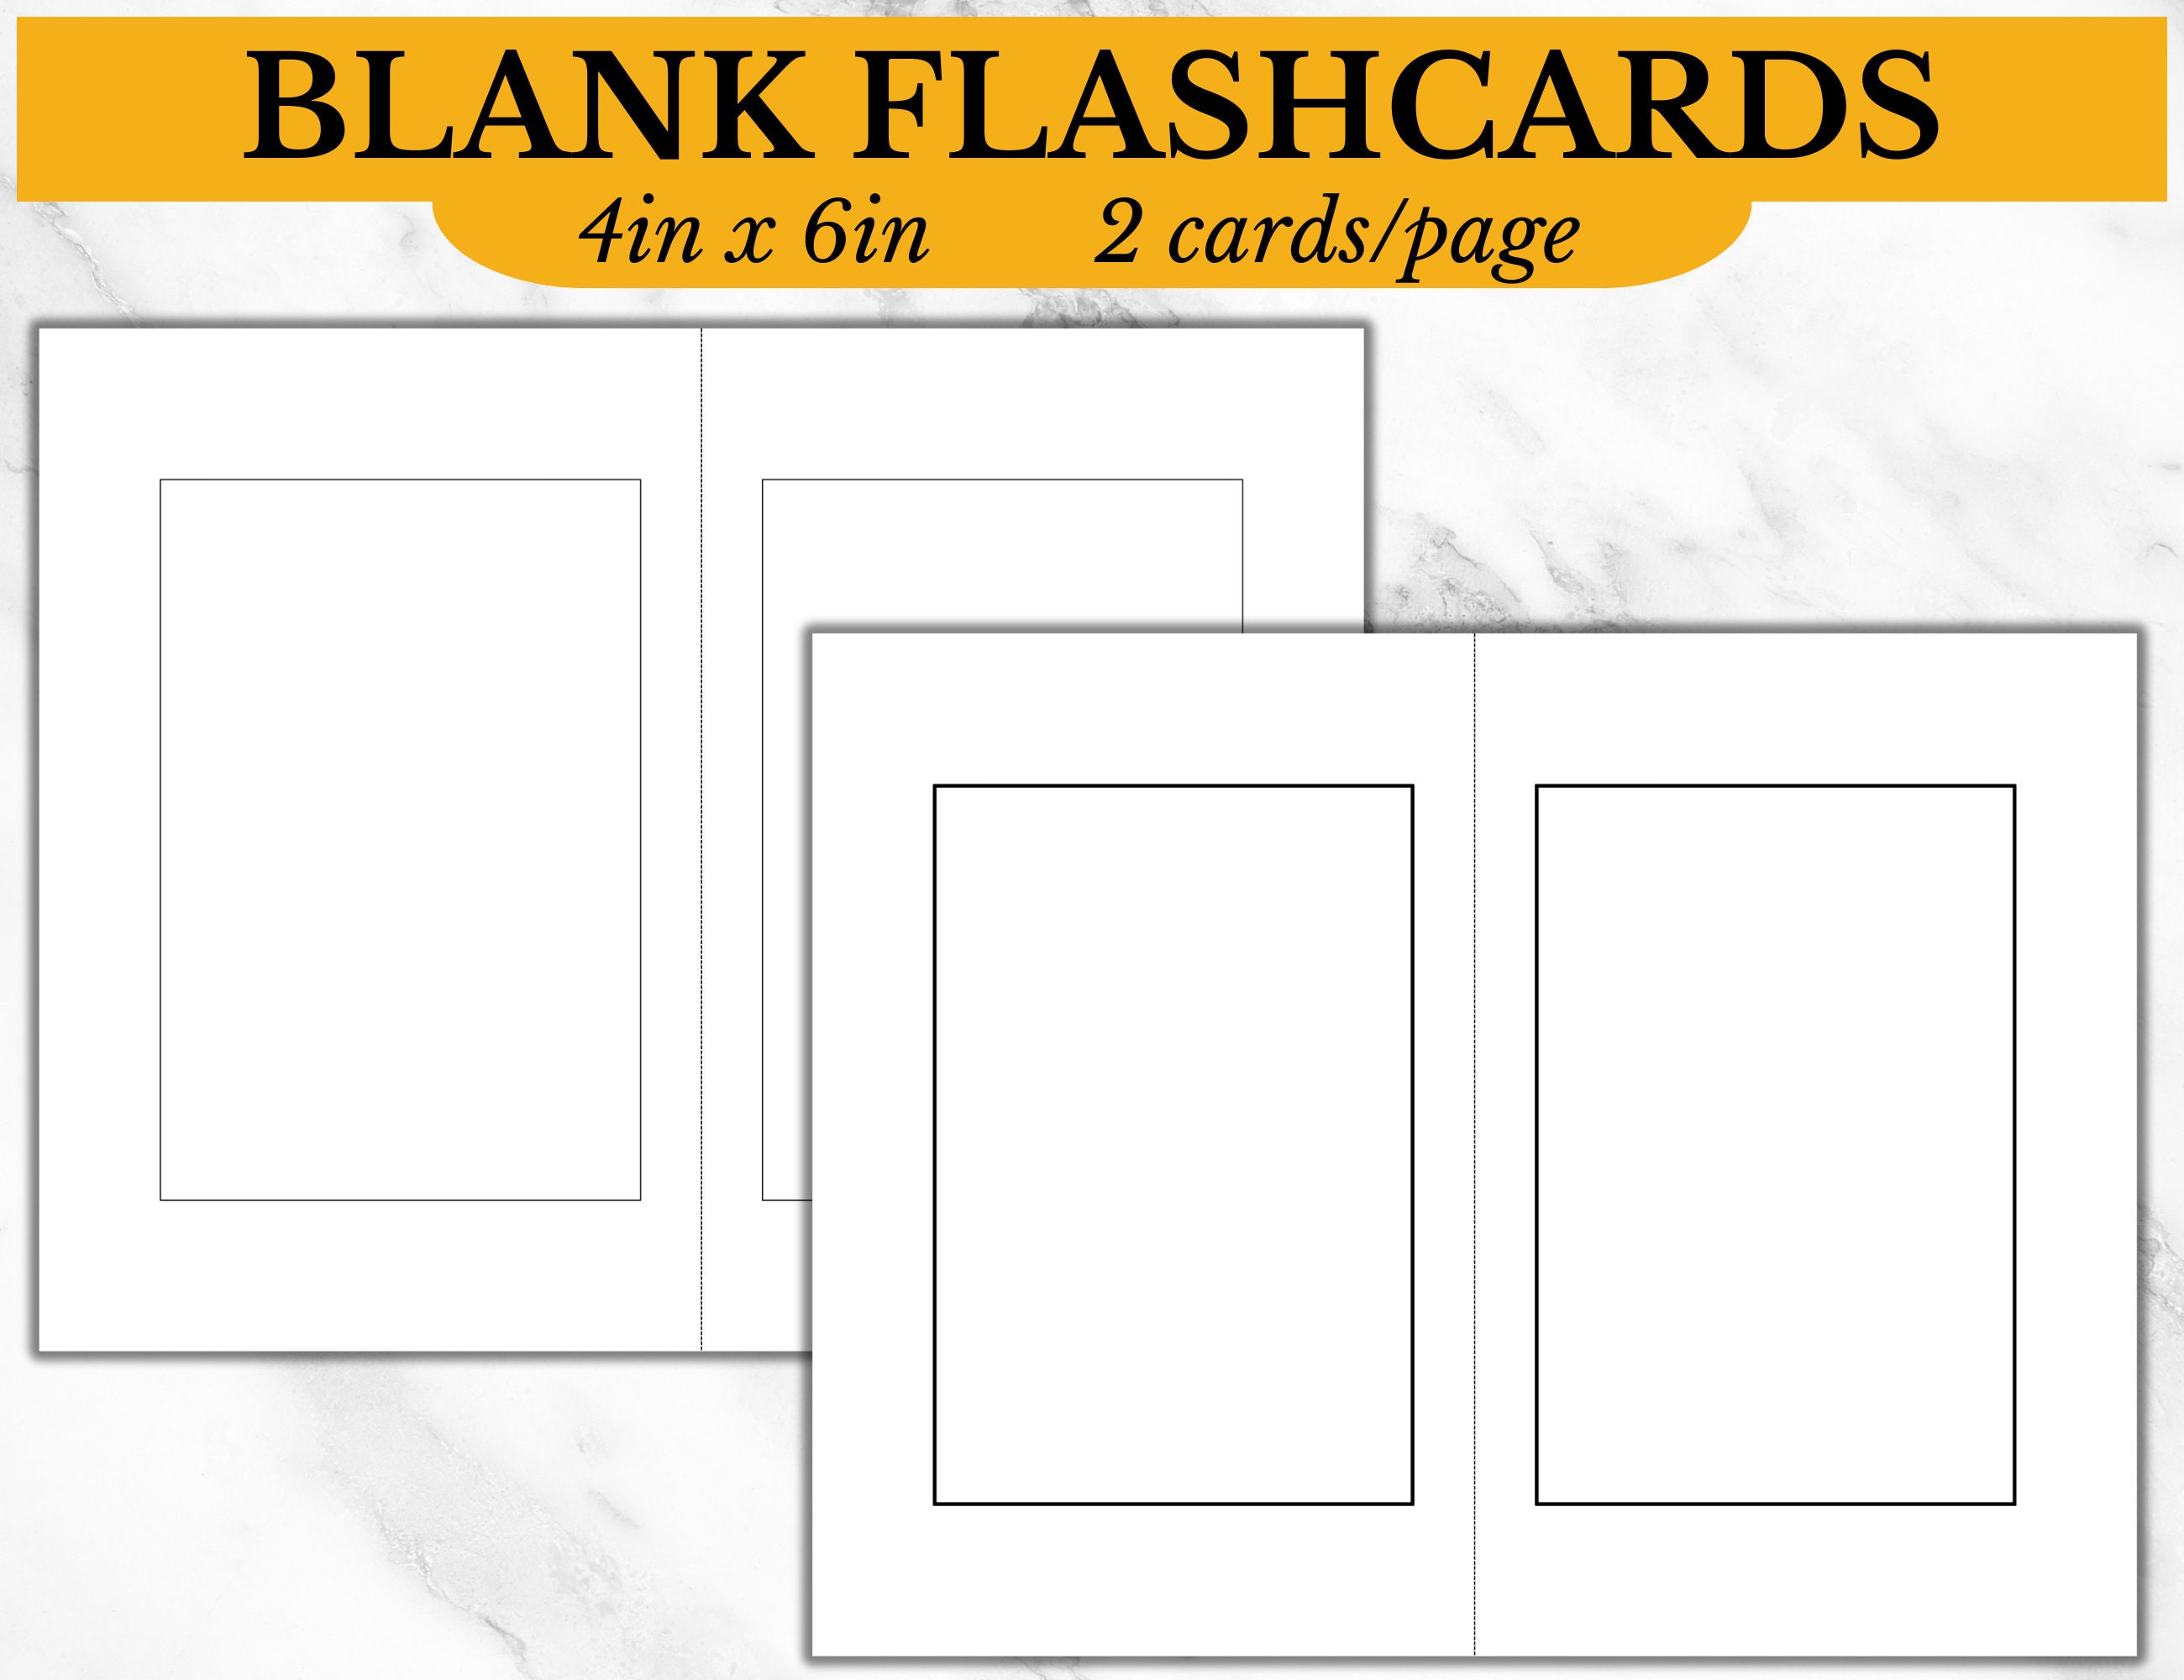 90pcs Blank Playing Cards White Blank Index Flash Cards DIY Game Creating  Game Card 3.5 X 2 Inch 